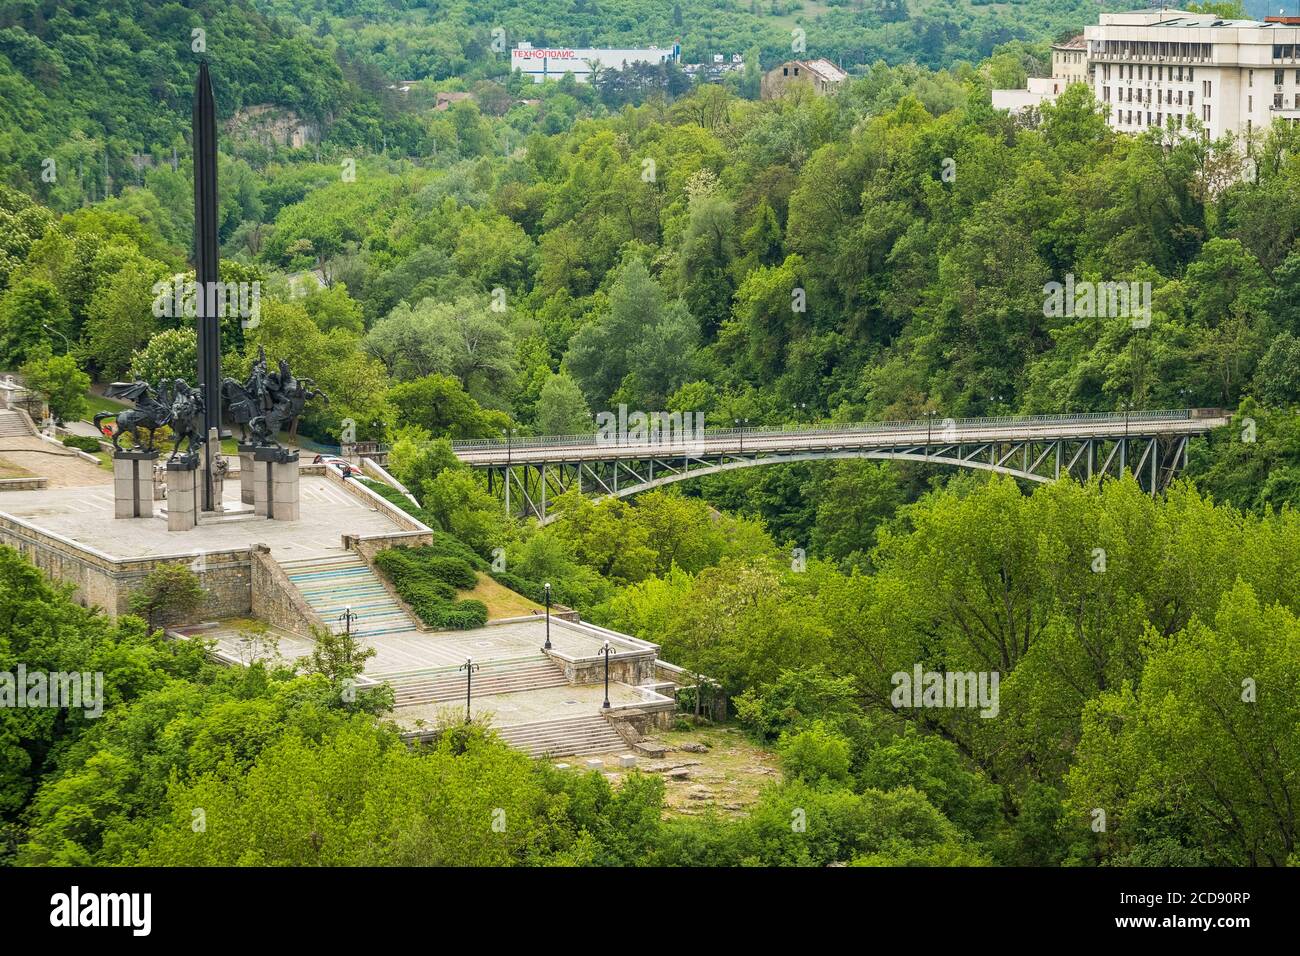 Bulgaria, Veliko Tarnovo, the monument of the Assen dynasty is dedicated to the kings Assen, Peter, Kaloyan and Ivan Assen II (built in 1985) Stock Photo